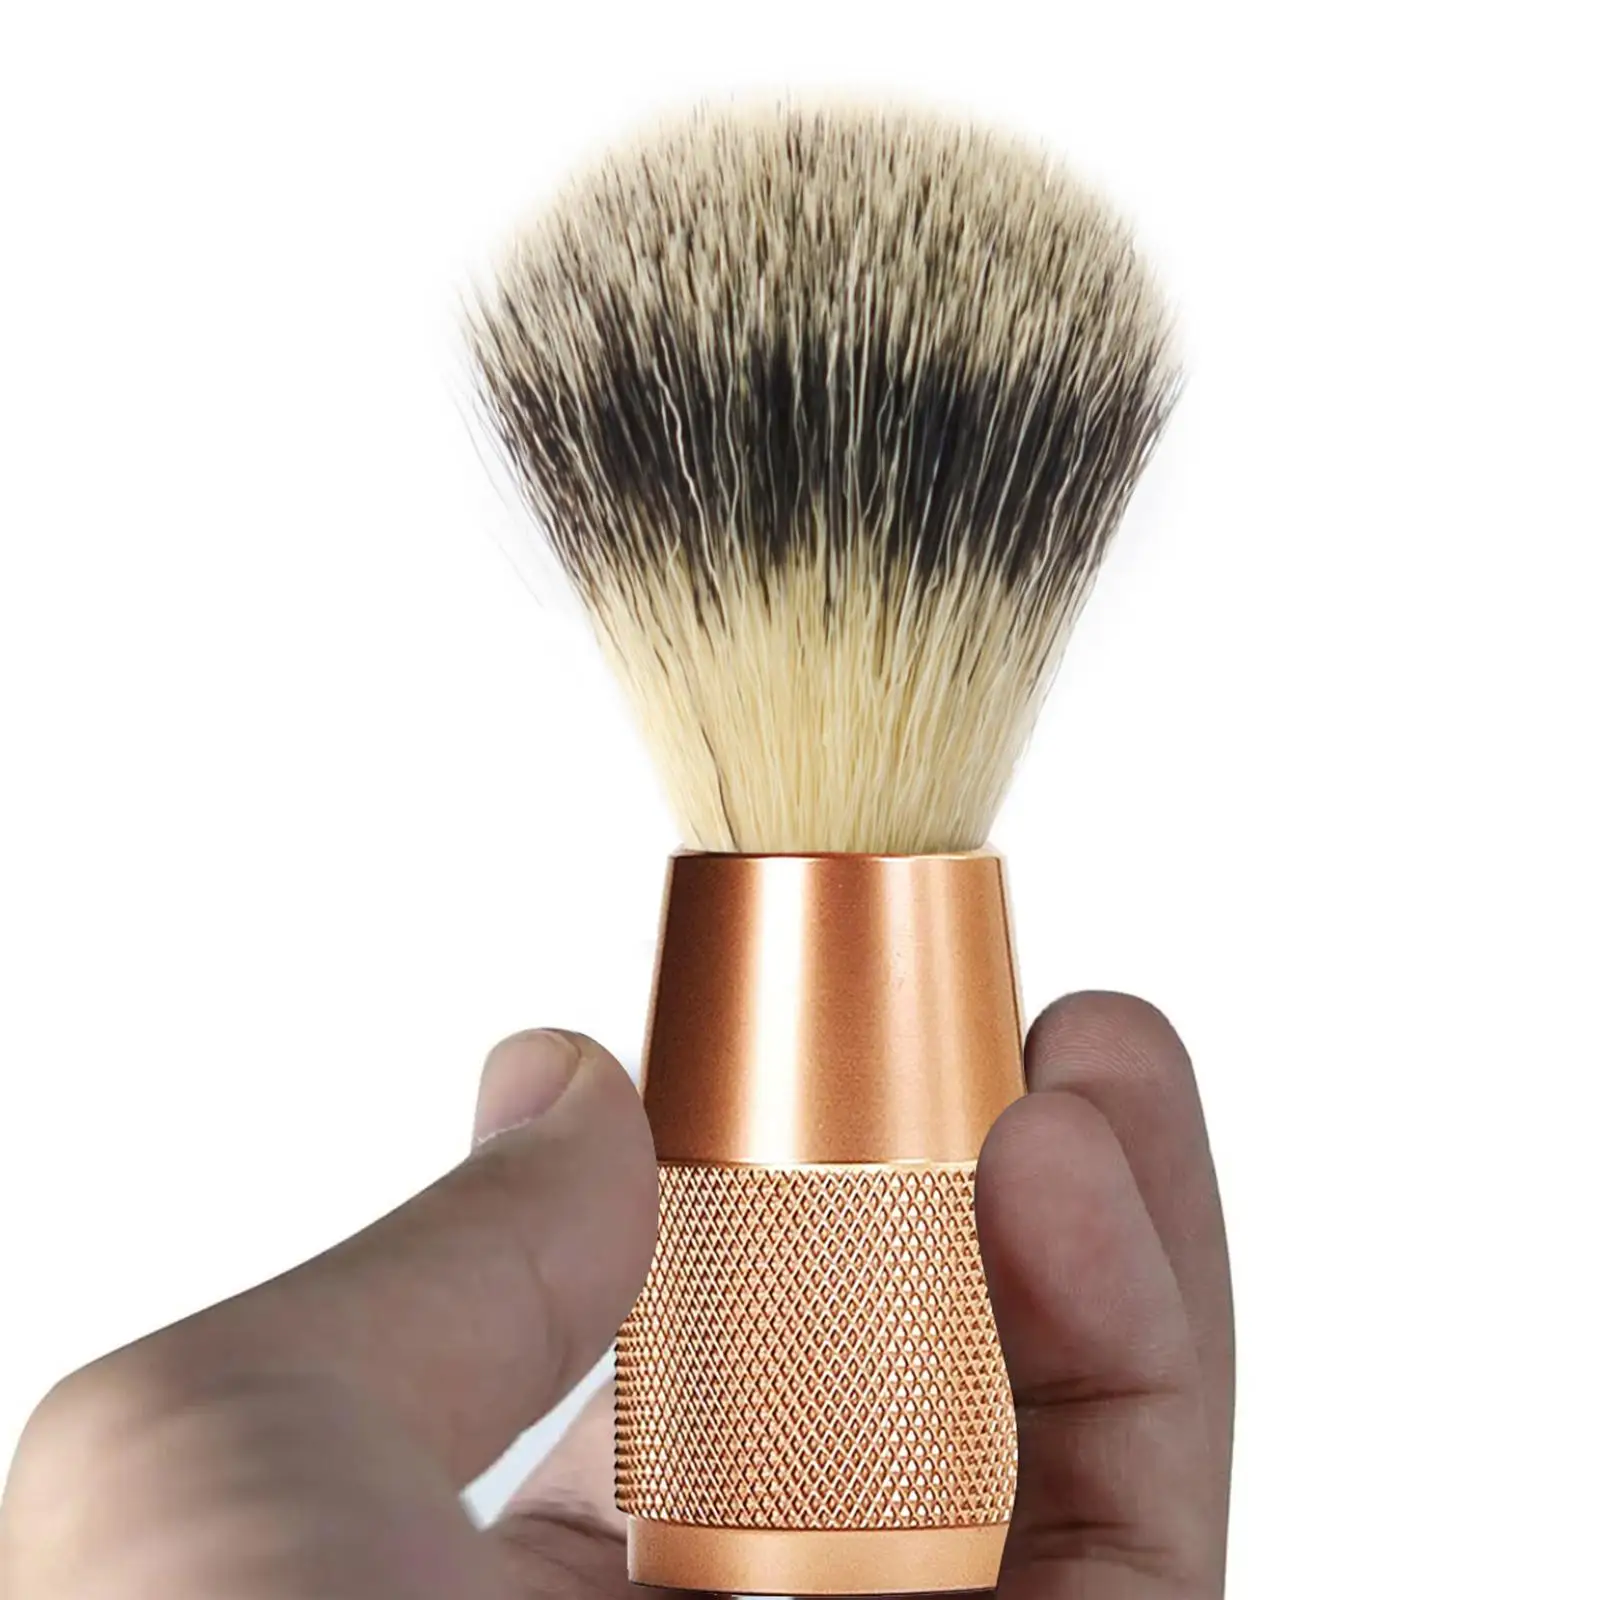 Shaving Brush for Men Comfortable Father Day Gifts Height 11cm Soft Nylon Bristles Handled Face Hair Cleaning Metal Handle